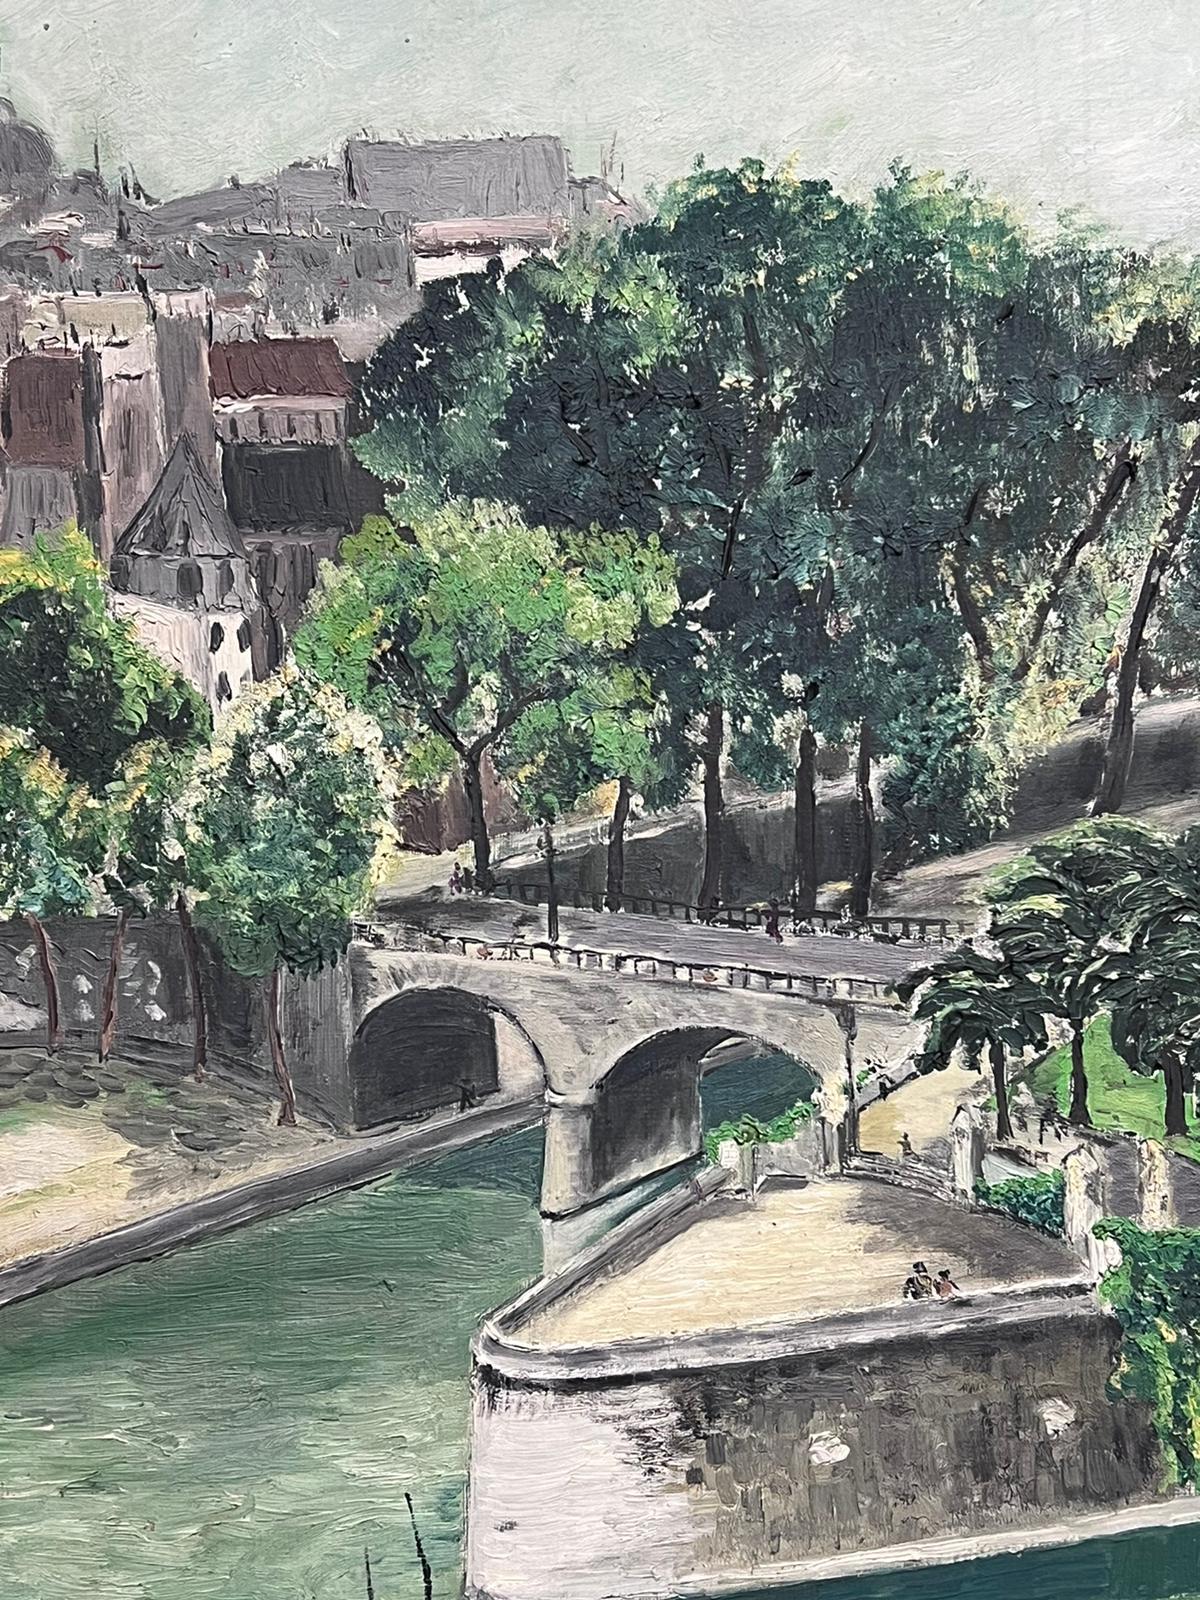 The River Seine, Paris
French School, mid 20th century
oil on canvas, framed
framed: 28 x 25 inches
canvas: 21.5 x 18 inches
provenance: private collection, France
condition: very good and sound condition